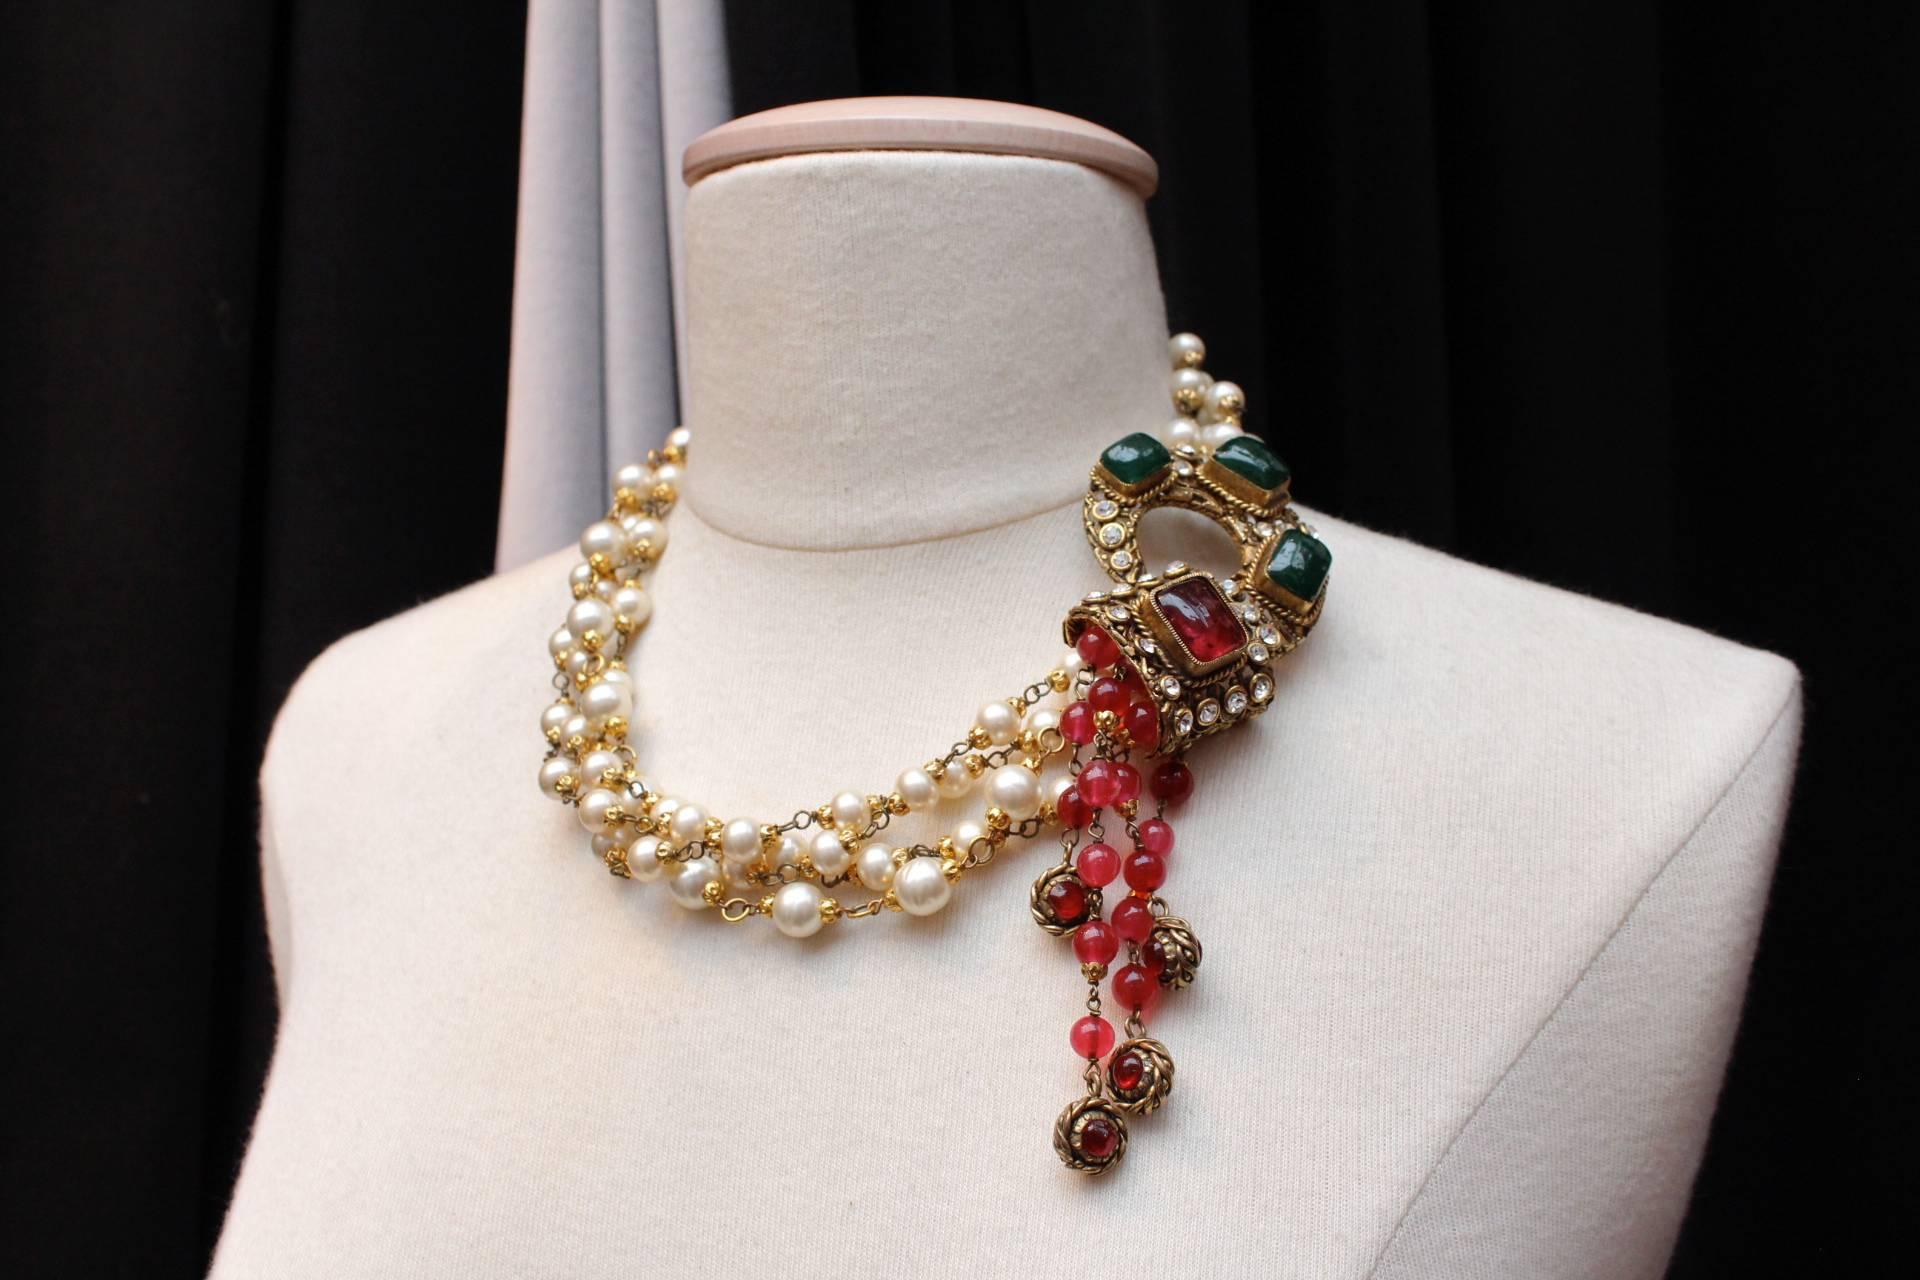 CHANEL ( Made in France) Multi stands necklace composed of faux pearls featuring with a hook clasp in a form of an arabesque in gold metal paved with white crystals and green and red glass paste holding several strands of red glass beads.